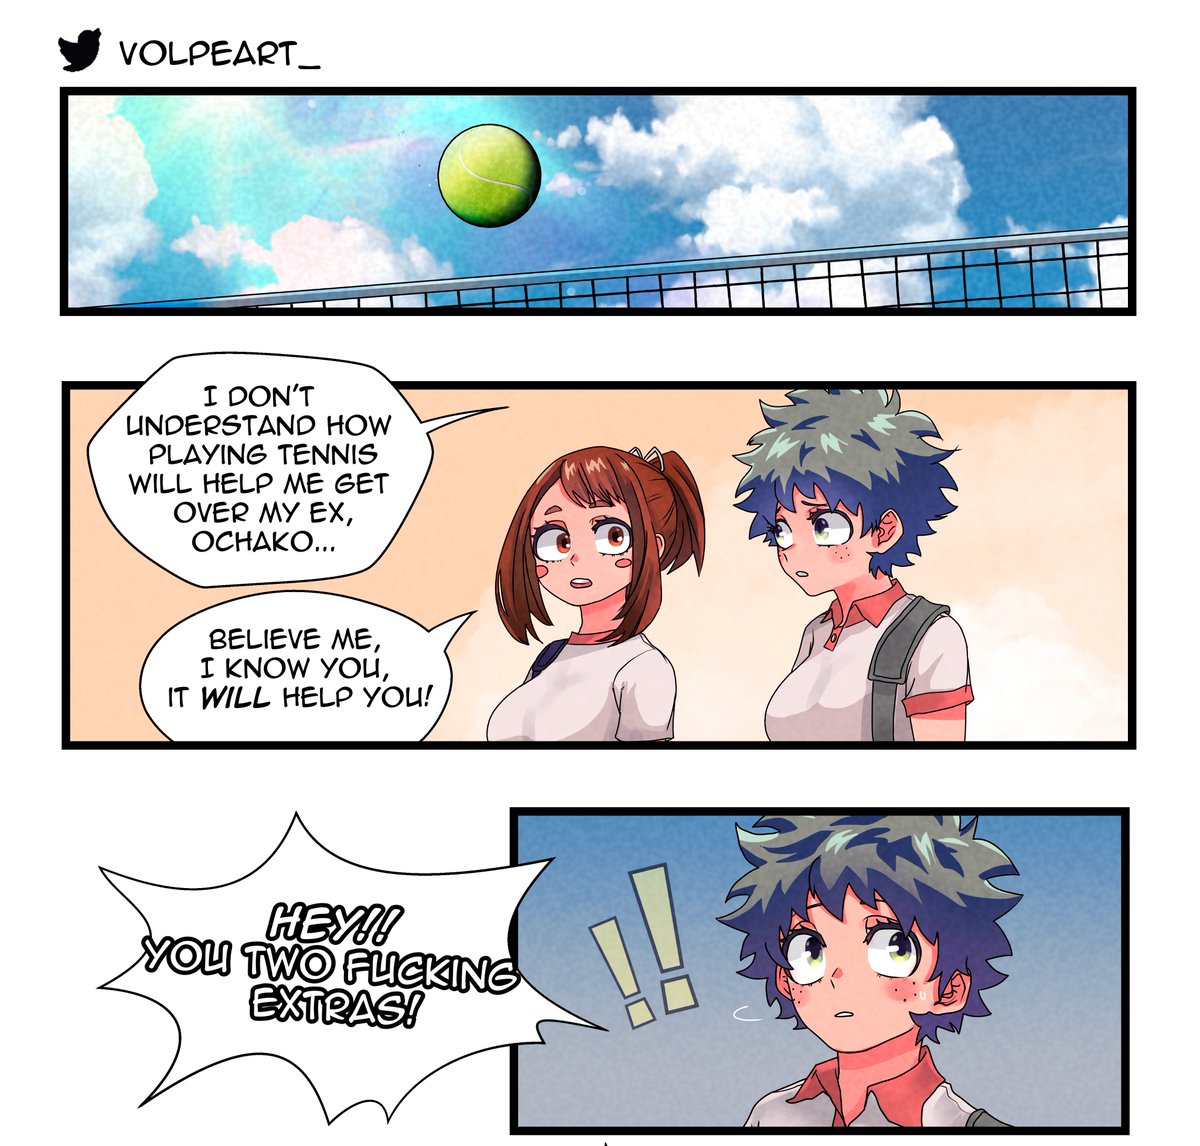 Ochako knows the type that Deku likes -blonde- 
( ͡° ͜ʖ ͡°) More Bkdk ♀️ 🧡💚

hehe (~˘▽˘)~  I am going to try to make more mini comics of different ideas that I have! 
stay tuned (「• ω •)「 